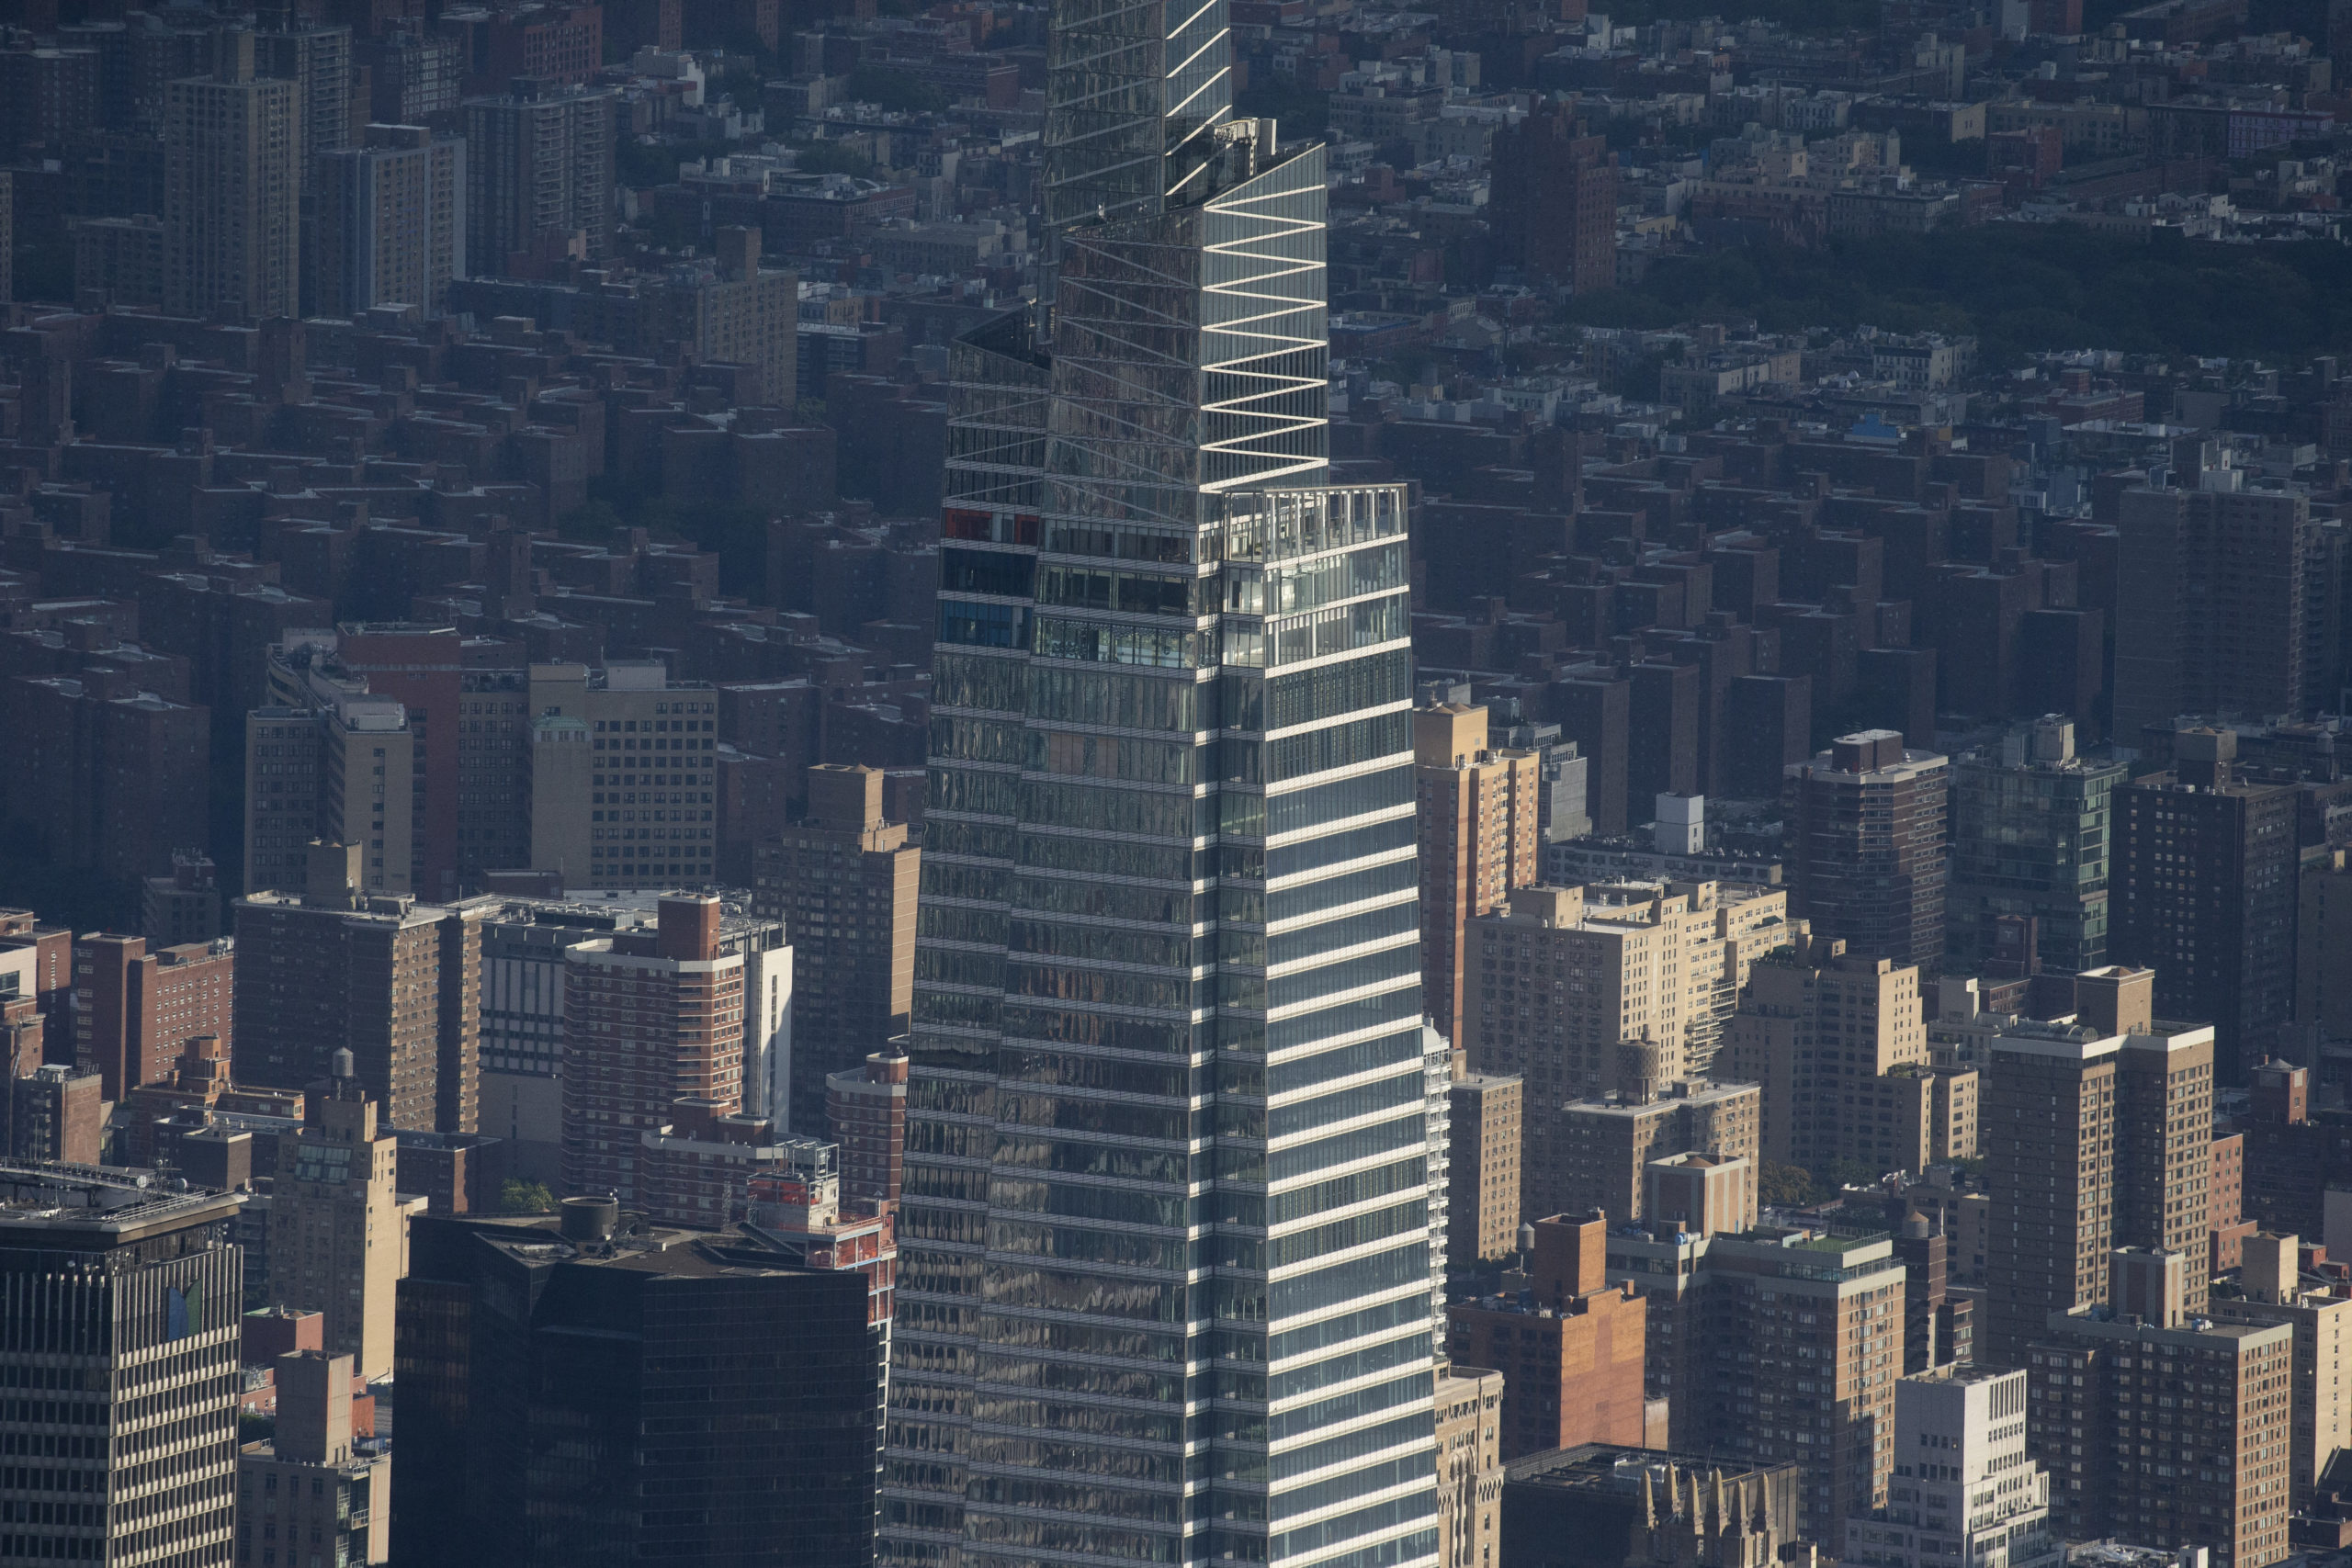 The photo shows the tower of Bank of America which is fined by US agencies for "botching" US COVID-19 aid programs